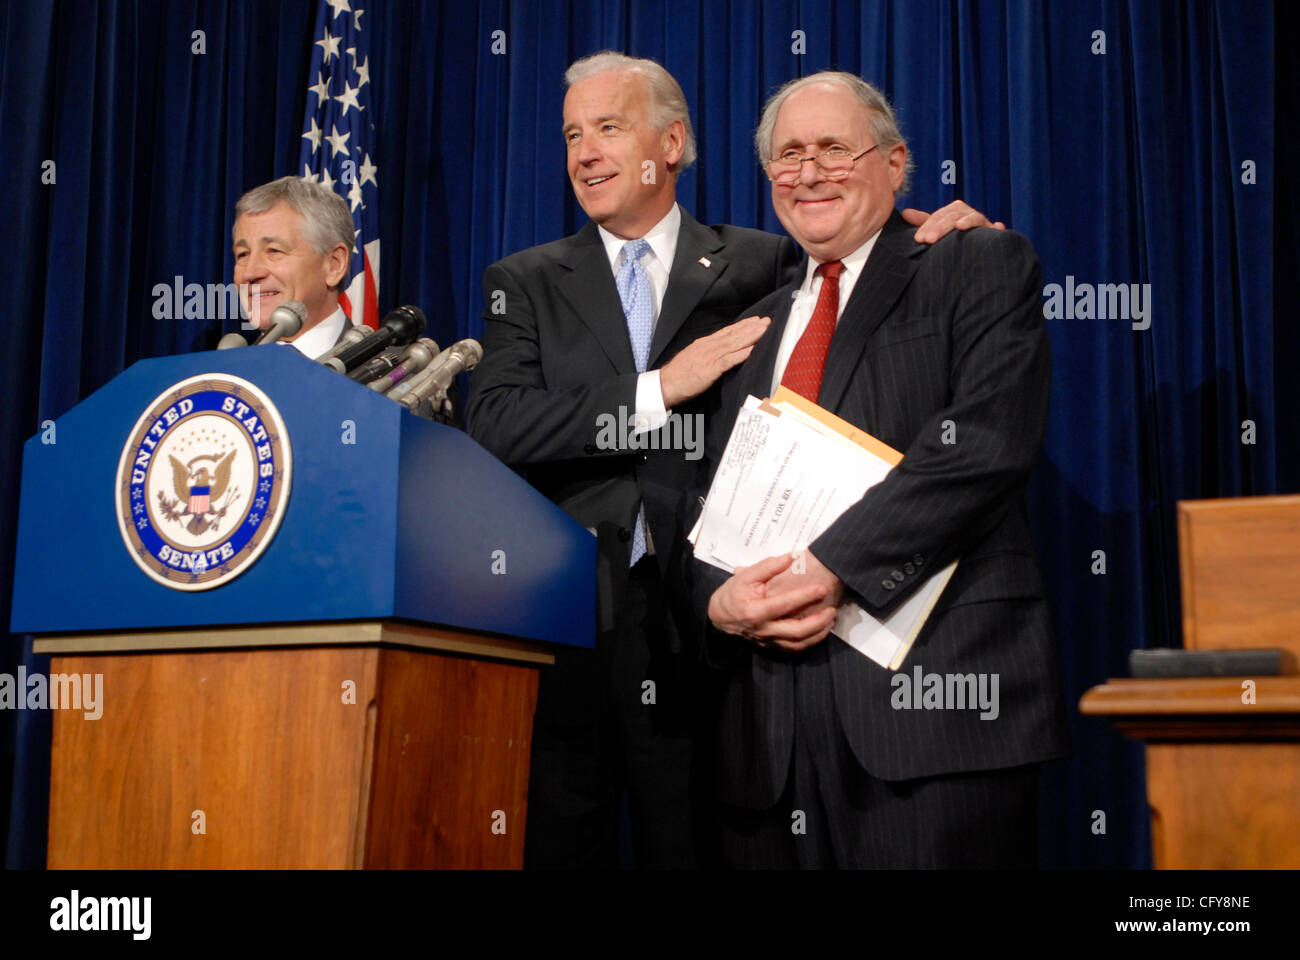 Jan 17, 2007; Washington, DC, USA; Senators CARL LEVIN (D-MI), JOESPH BIDEN (D-DE) and CHUCK HAGEL (R-NE) announce a resolution stating opposition to President George W. Bush's escalation of US troops in the Iraq War. The resolution was co-authored by all three Senators.  Mandatory Credit: Photo by  Stock Photo